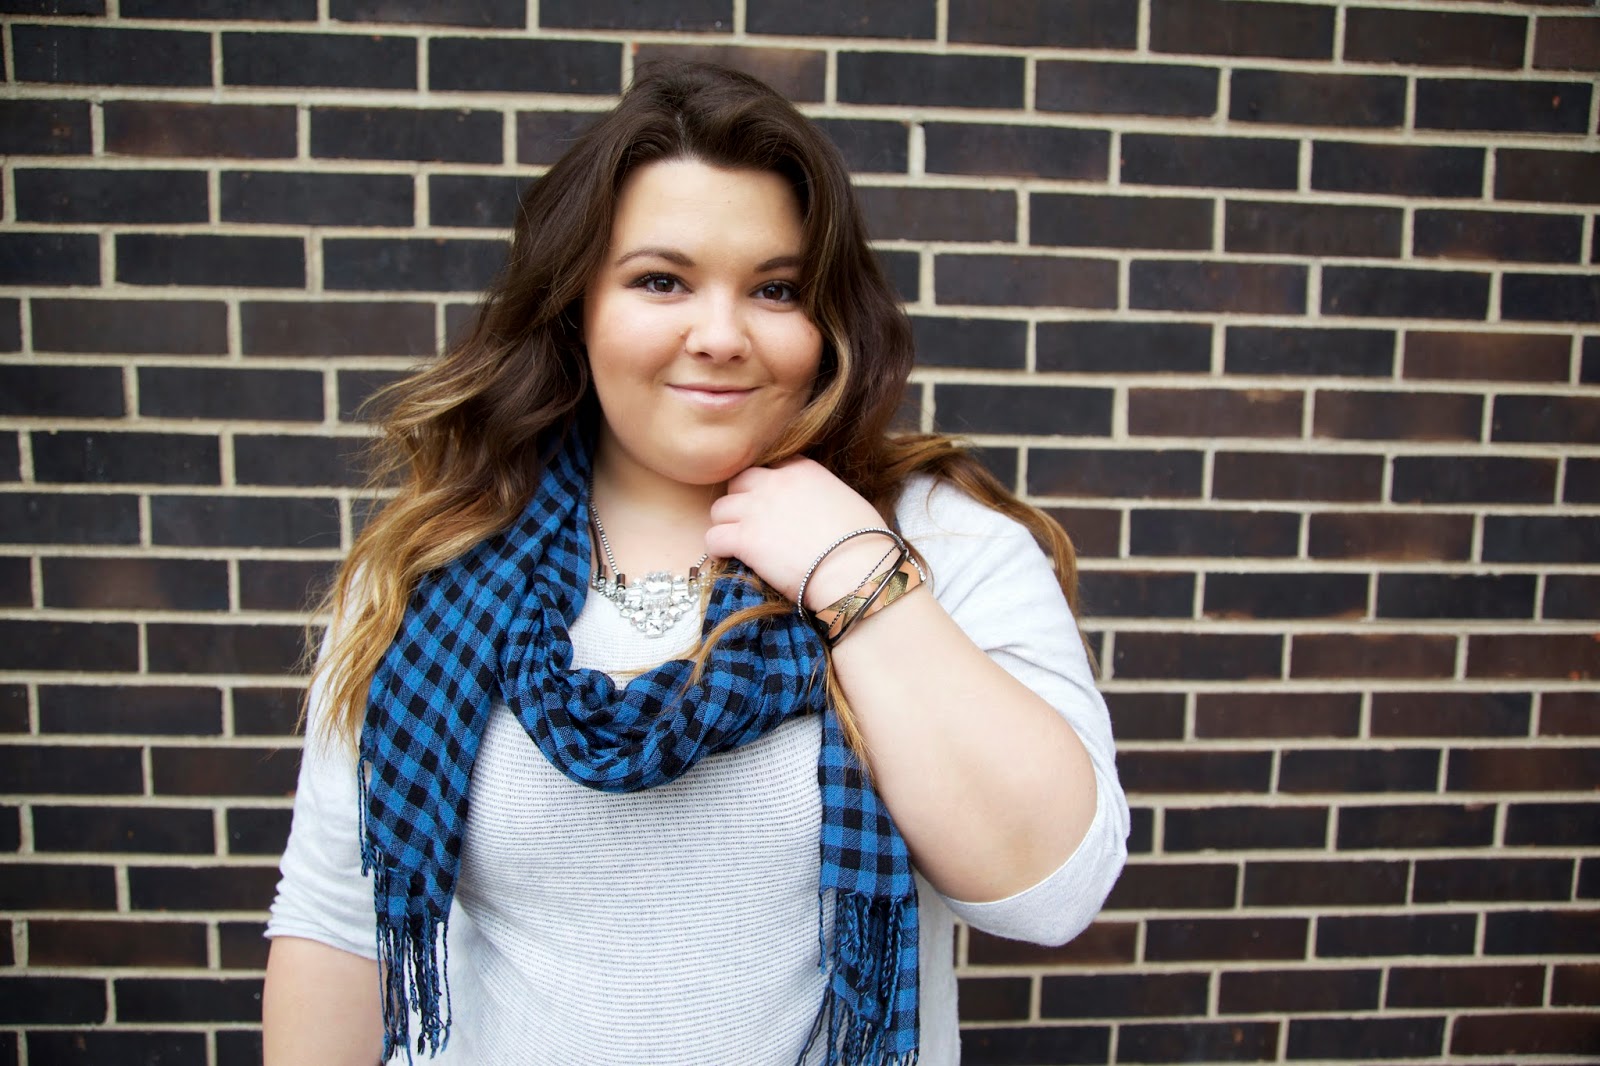 A GOOD IDEA — Natalie in the City - A Chicago Plus Size Fashion Blog by ...